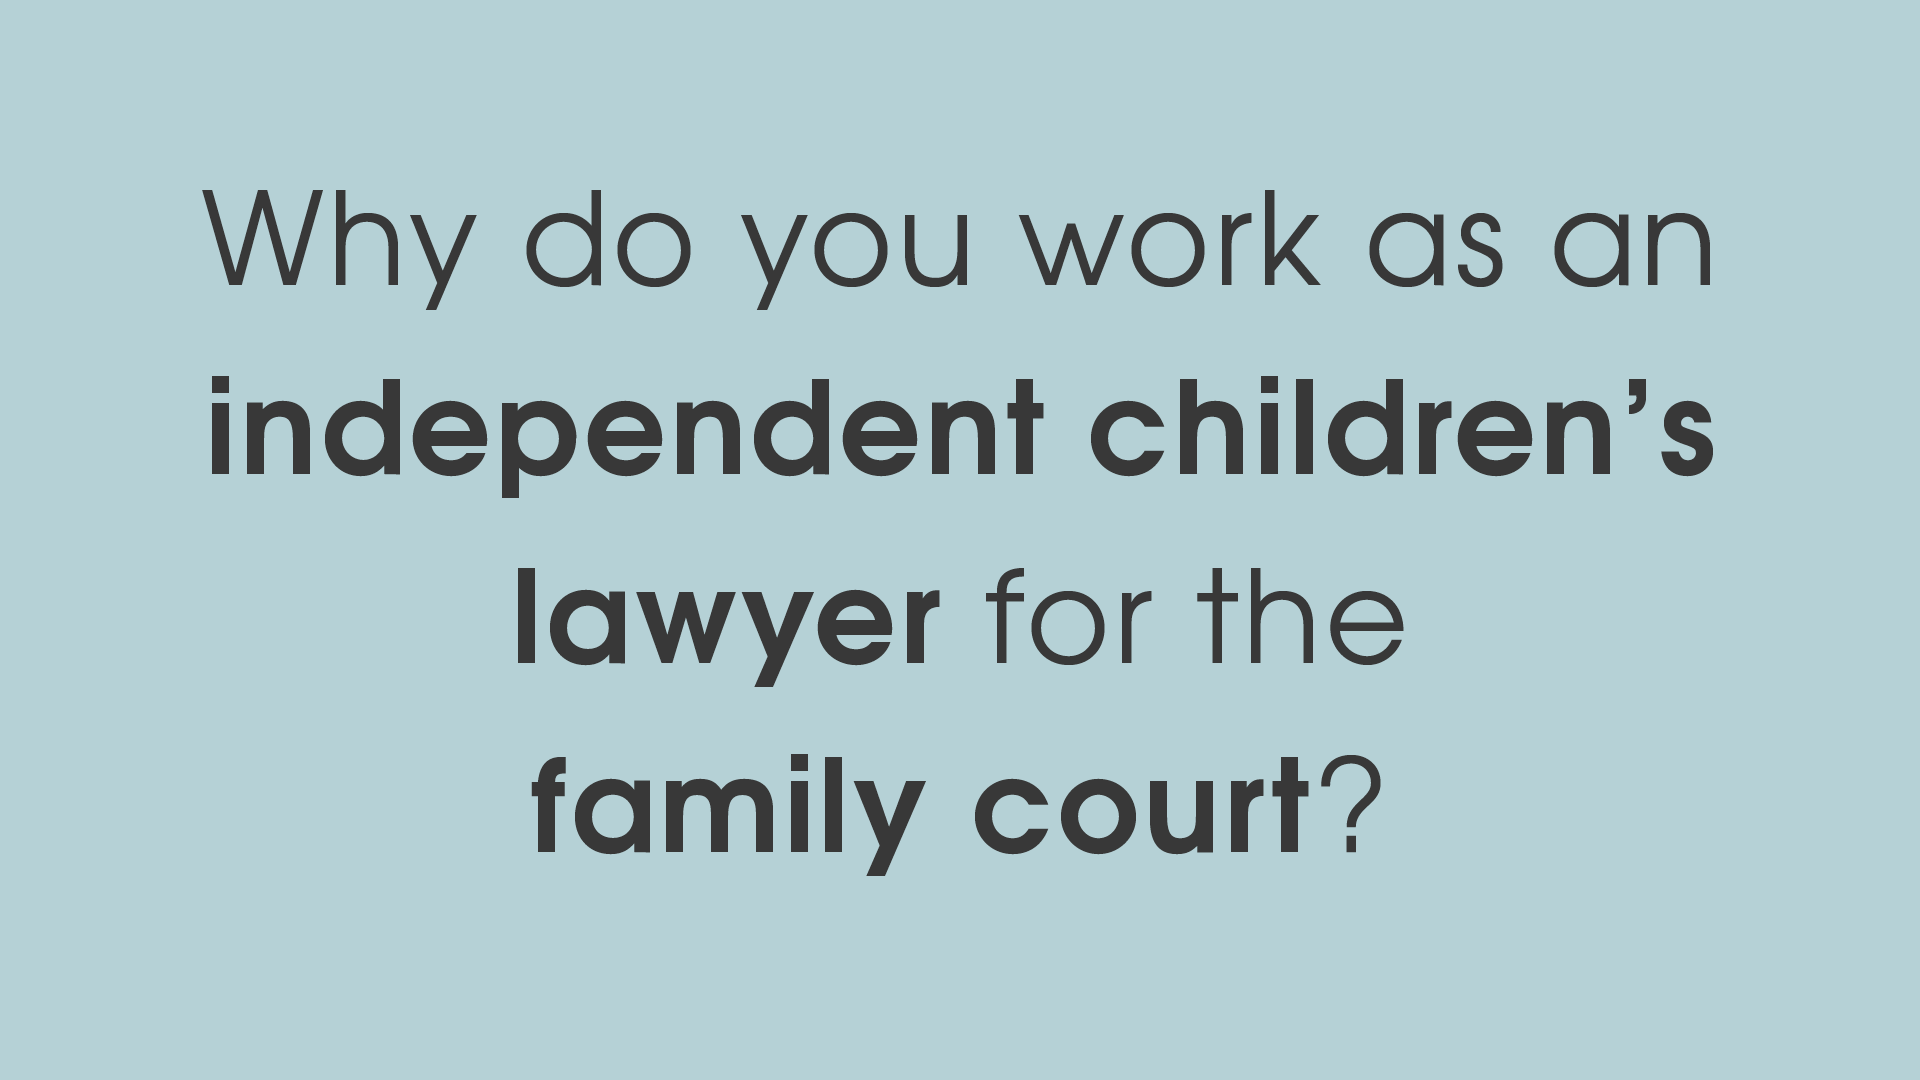 Family lawyer article video - Why do you work as an independent children's lawyer for the family court